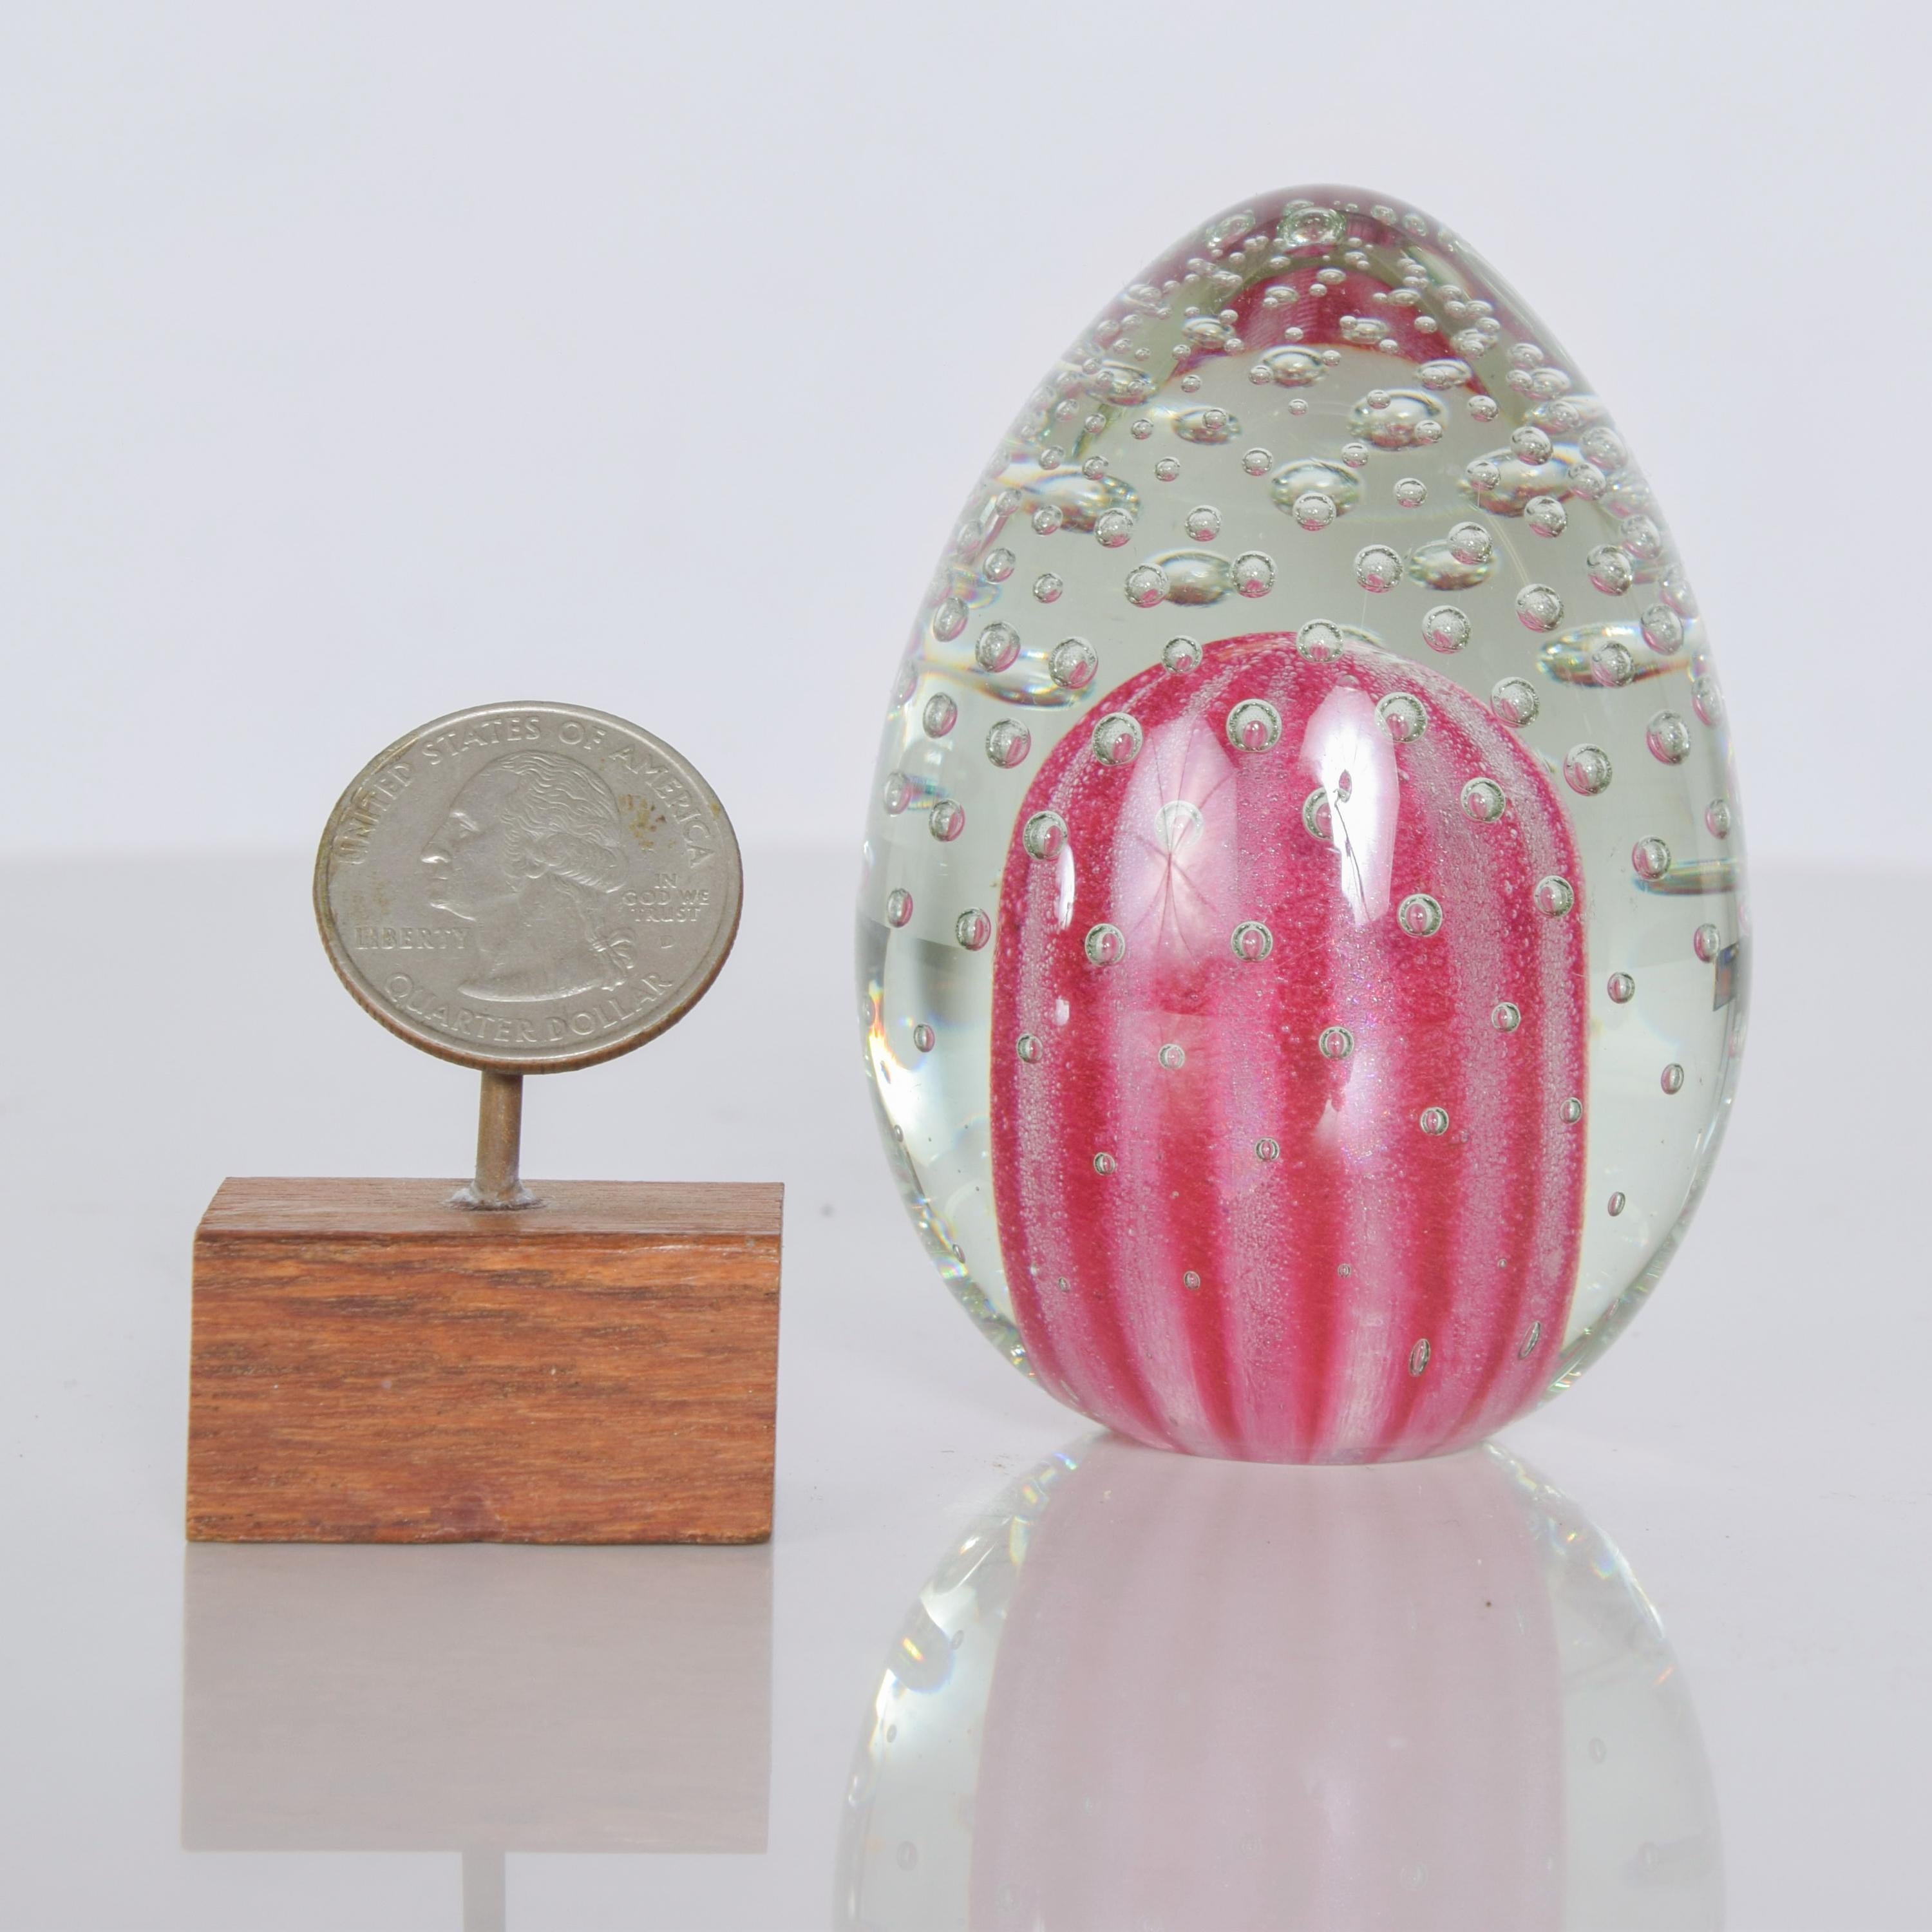 Shocking pink paperweight Tapio Wirkkala style controlled bubble art glass decorative egg design signed 1990
Unable to read signature
Attributed to the design style of Tapio Wirkkala Scandinavian Glass. Similar to Iittala glass and finnish